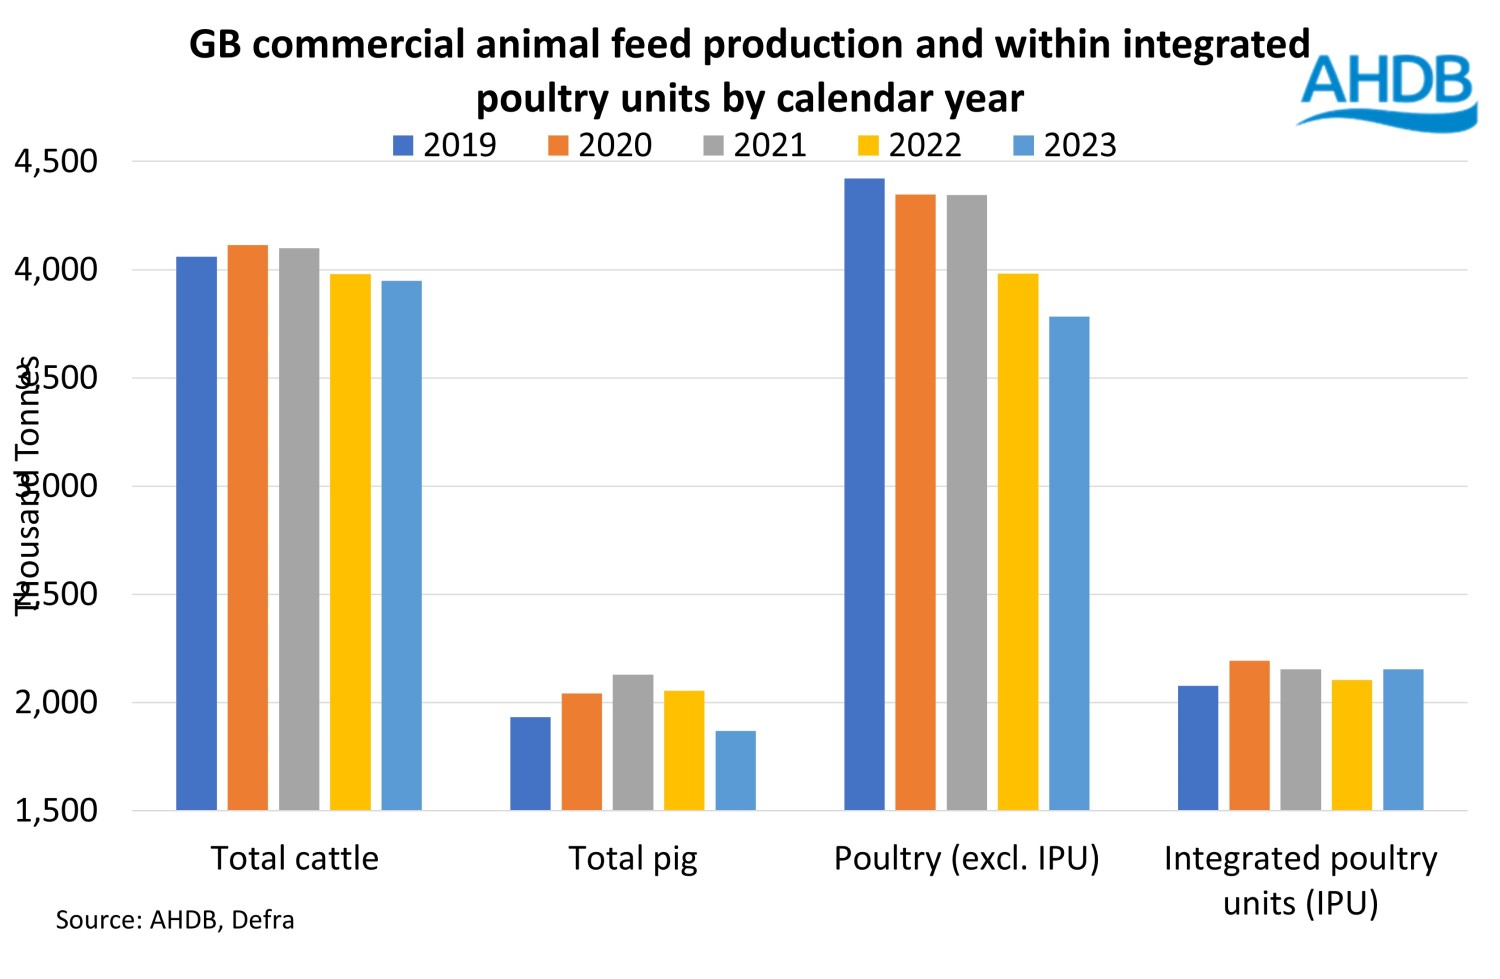 Graph showing GB commercial animal feed production and within integrated poultry units.